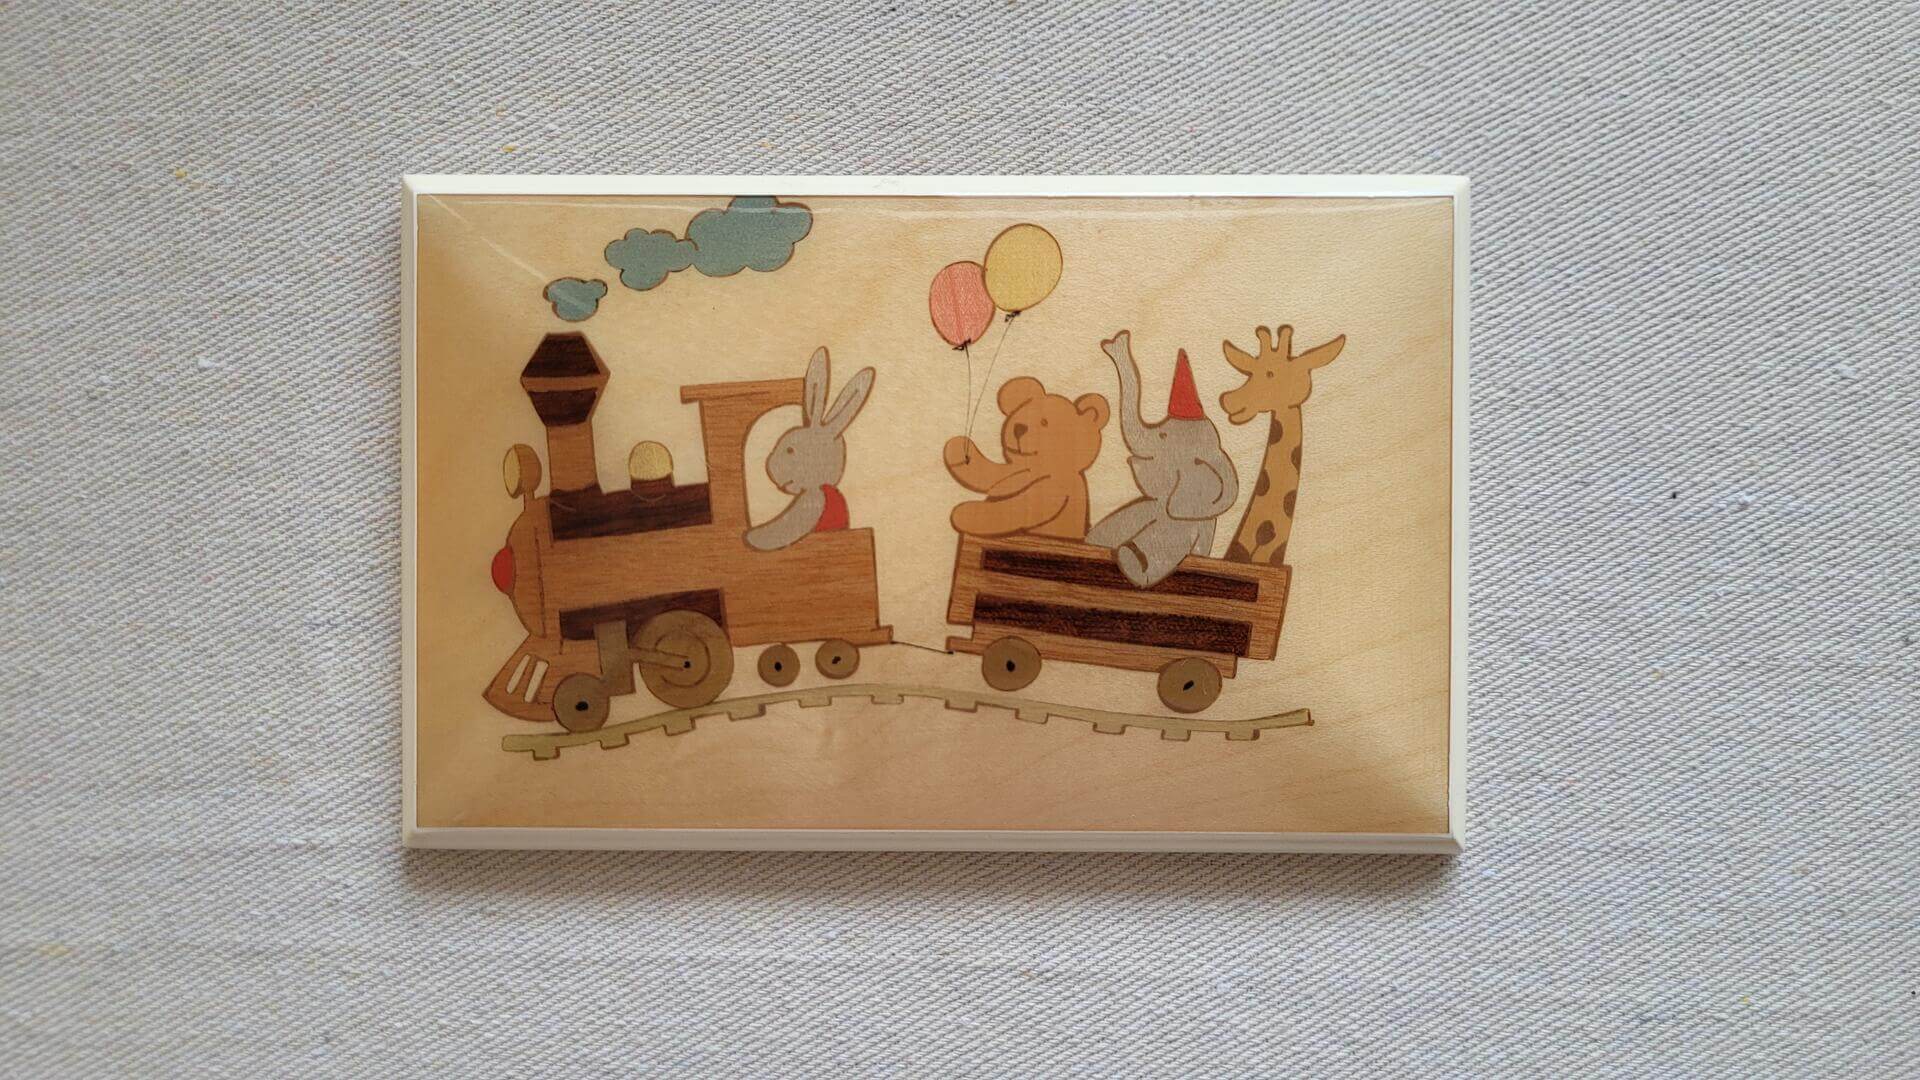 Beautiful Miss Bellevue Meta Di Sorrento wood inlay plaque picture for kids room showcasing animals riding a train. Vintage hand made made in Italy wood art